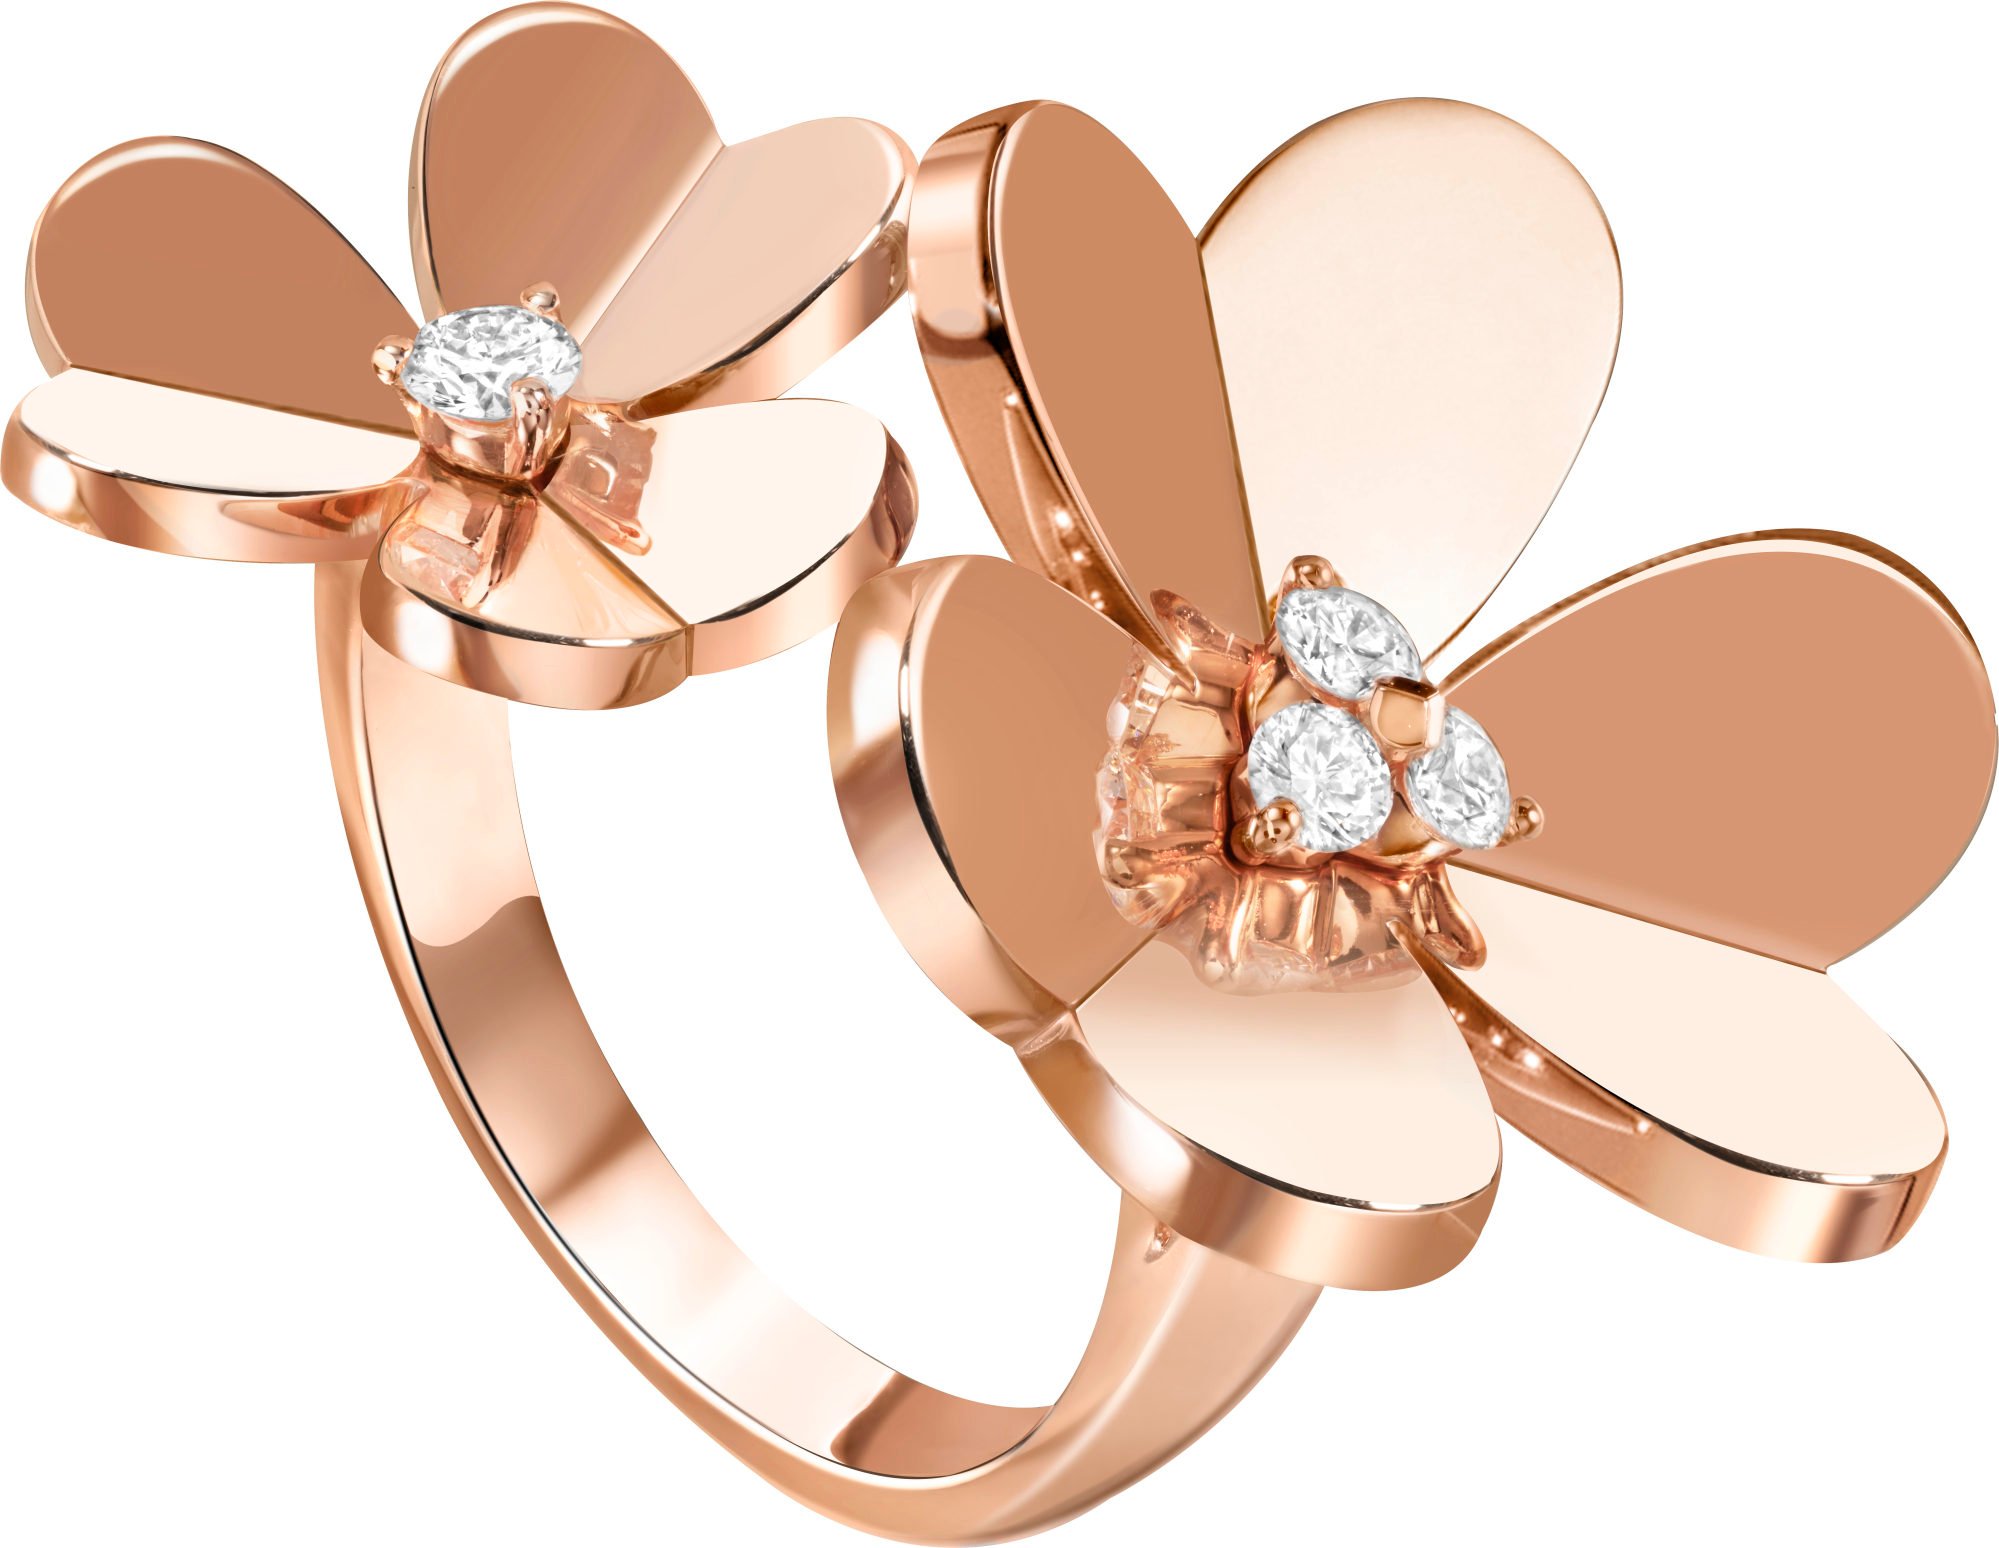 style edit: how new pieces from van cleef & arpels’ frivole collection take inspiration from nature while matching diamonds with precious alloys on rings and bracelets